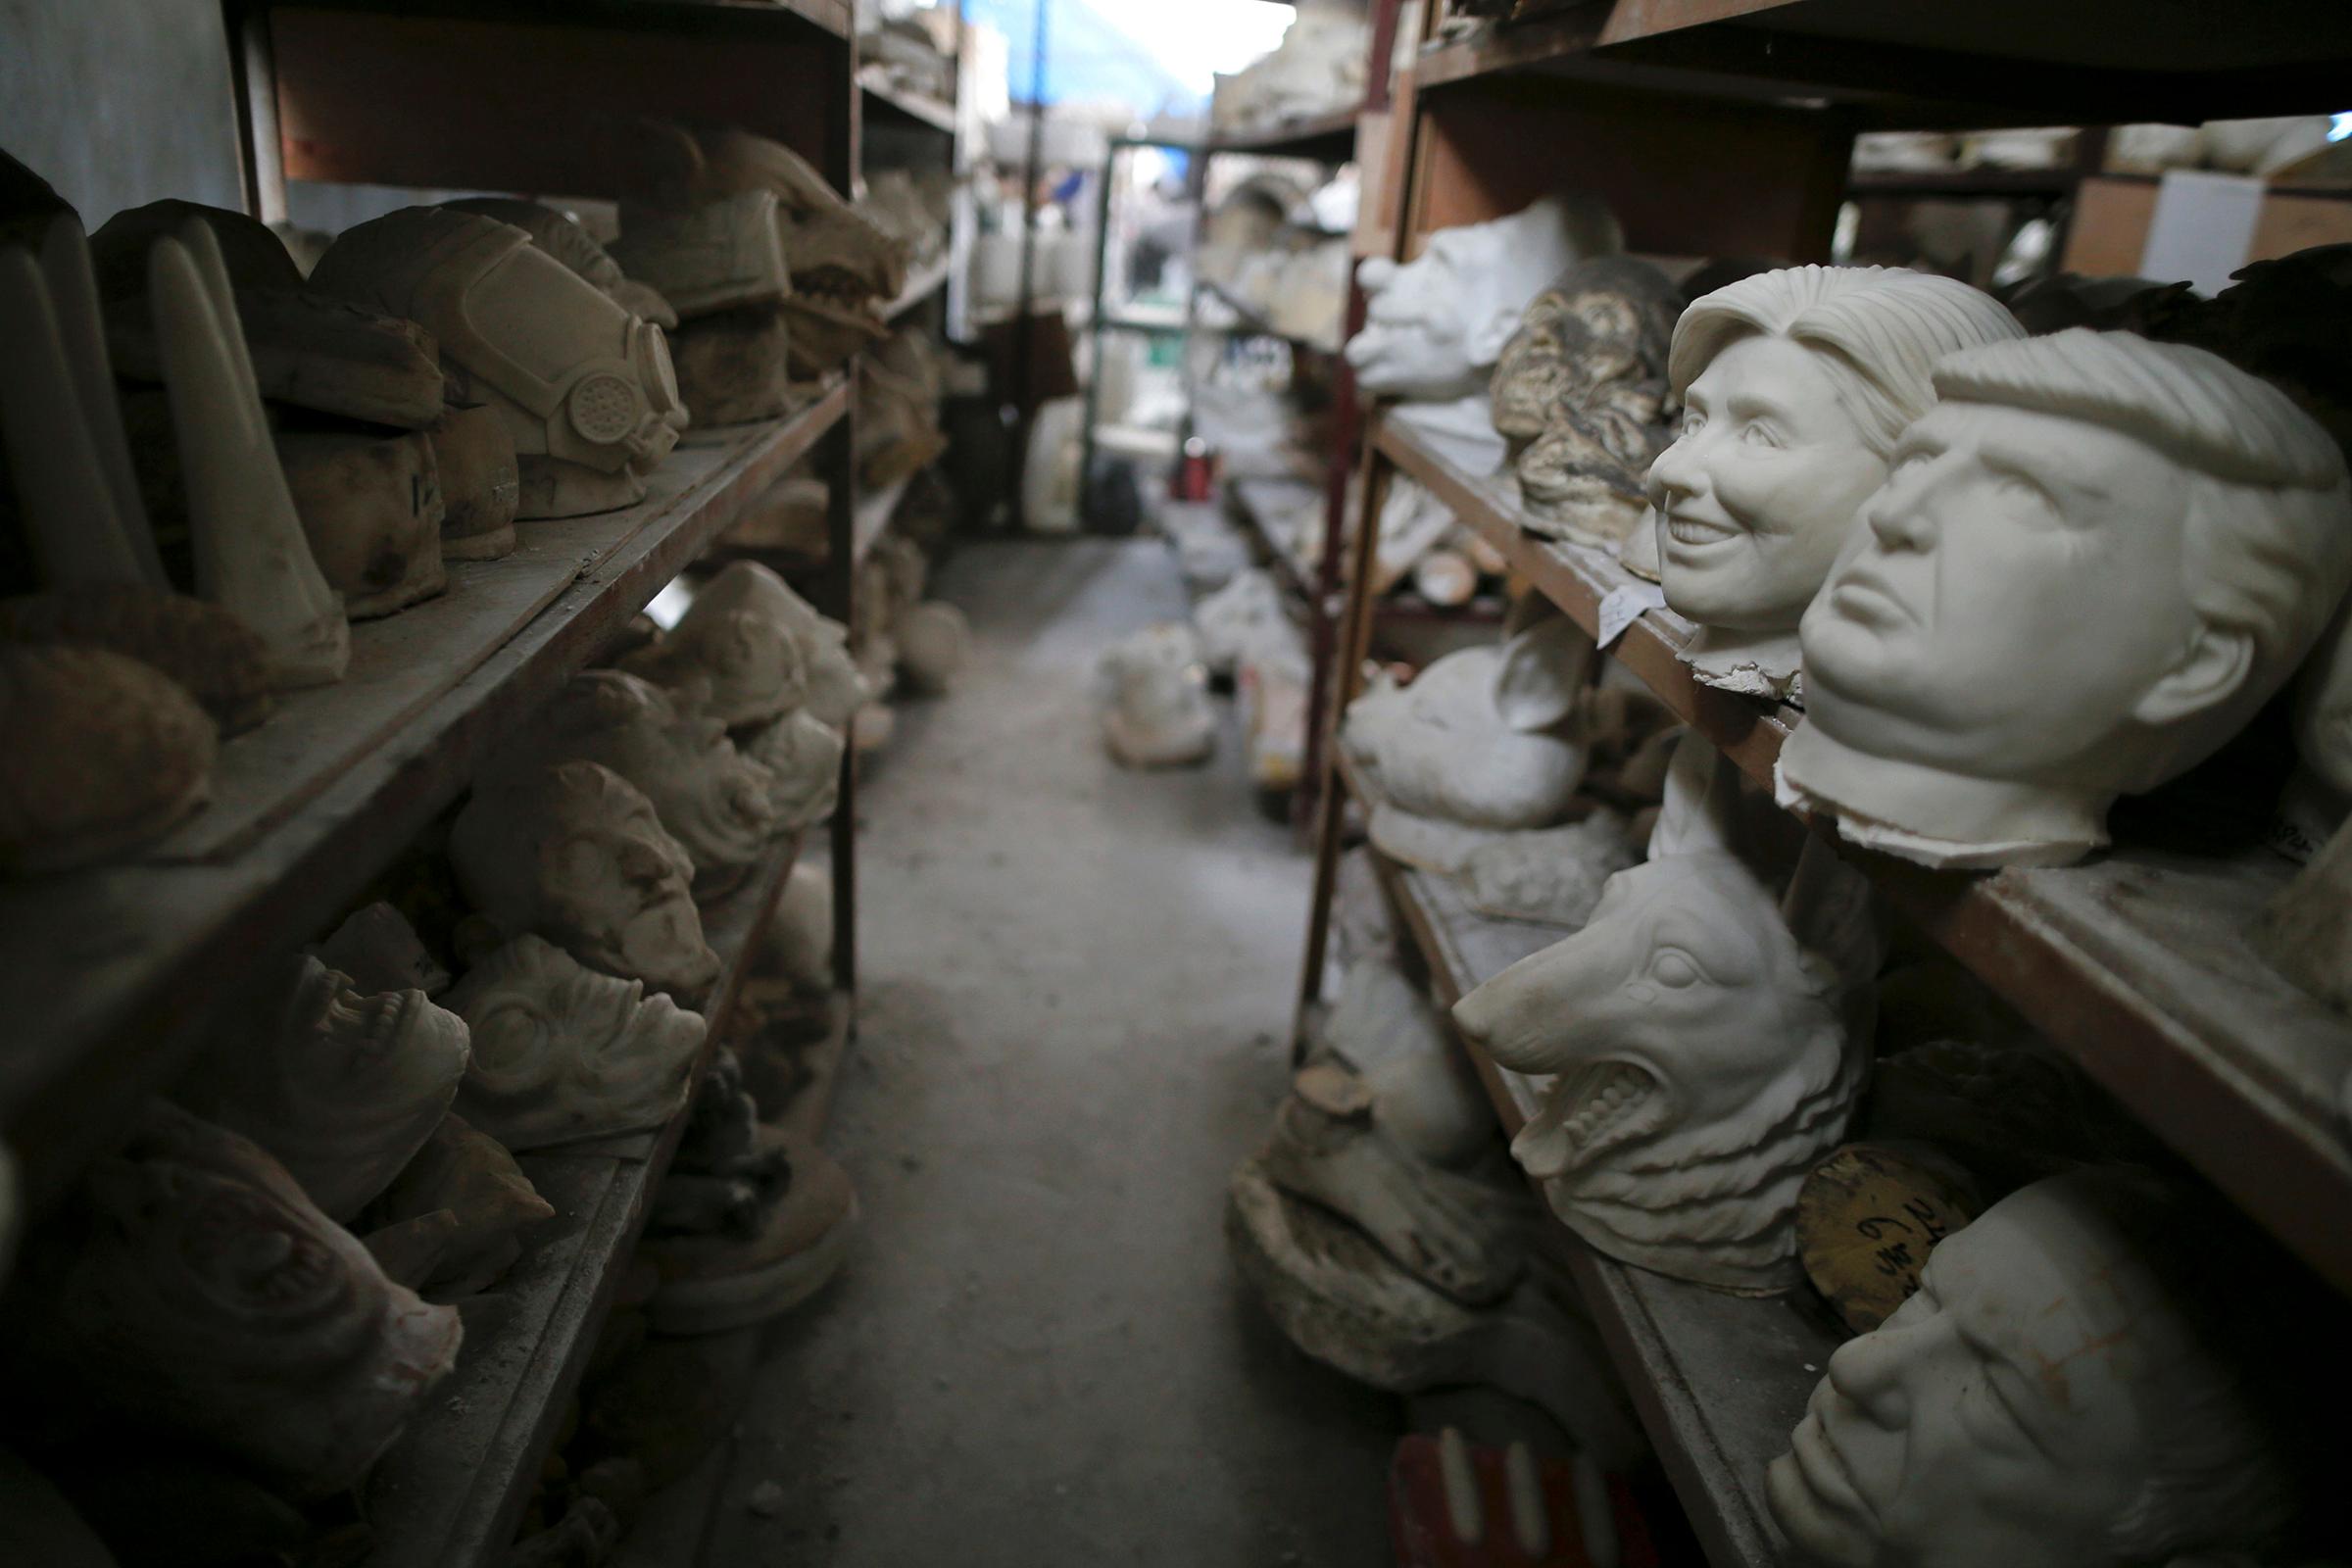 Molds for different masks, including those of Democratic presidential candidate Hillary Clinton and Republican presidential candidate Donald Trump, sit on shelves at Jinhua Partytime Latex Art and Crafts Factory in Jinhua, Zhejiang Province, China, May 25, 2016.